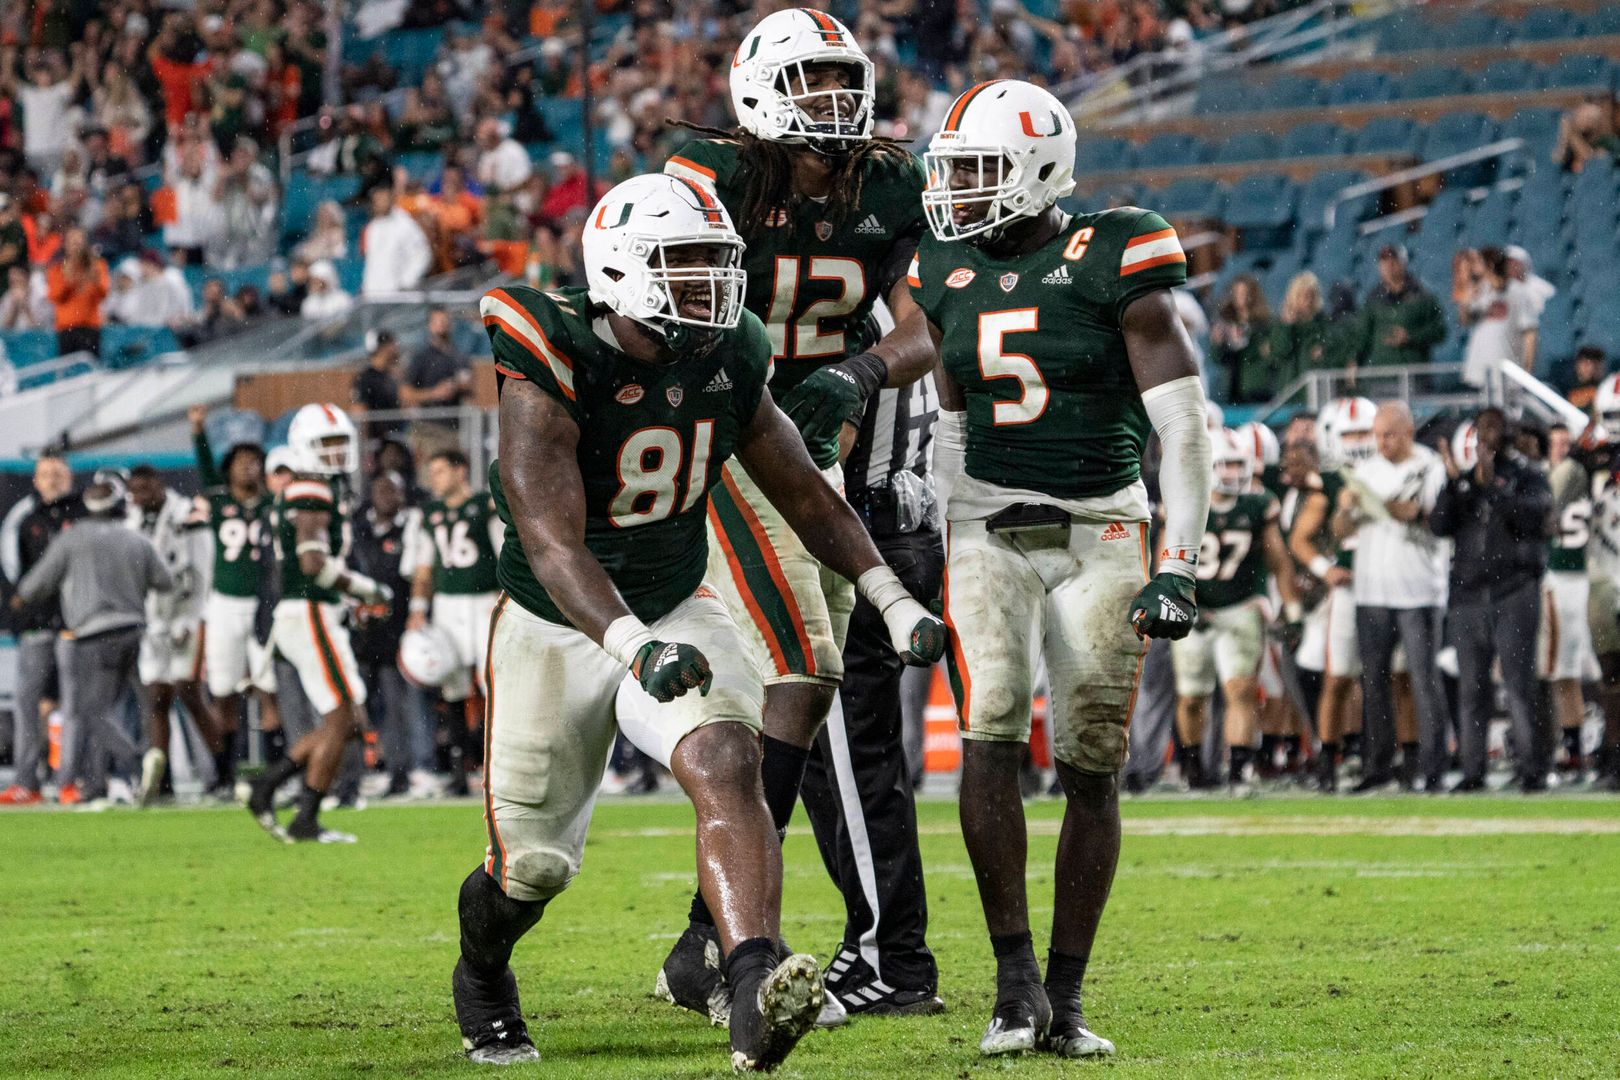 Takeaways from Miami's Win over Virginia Tech